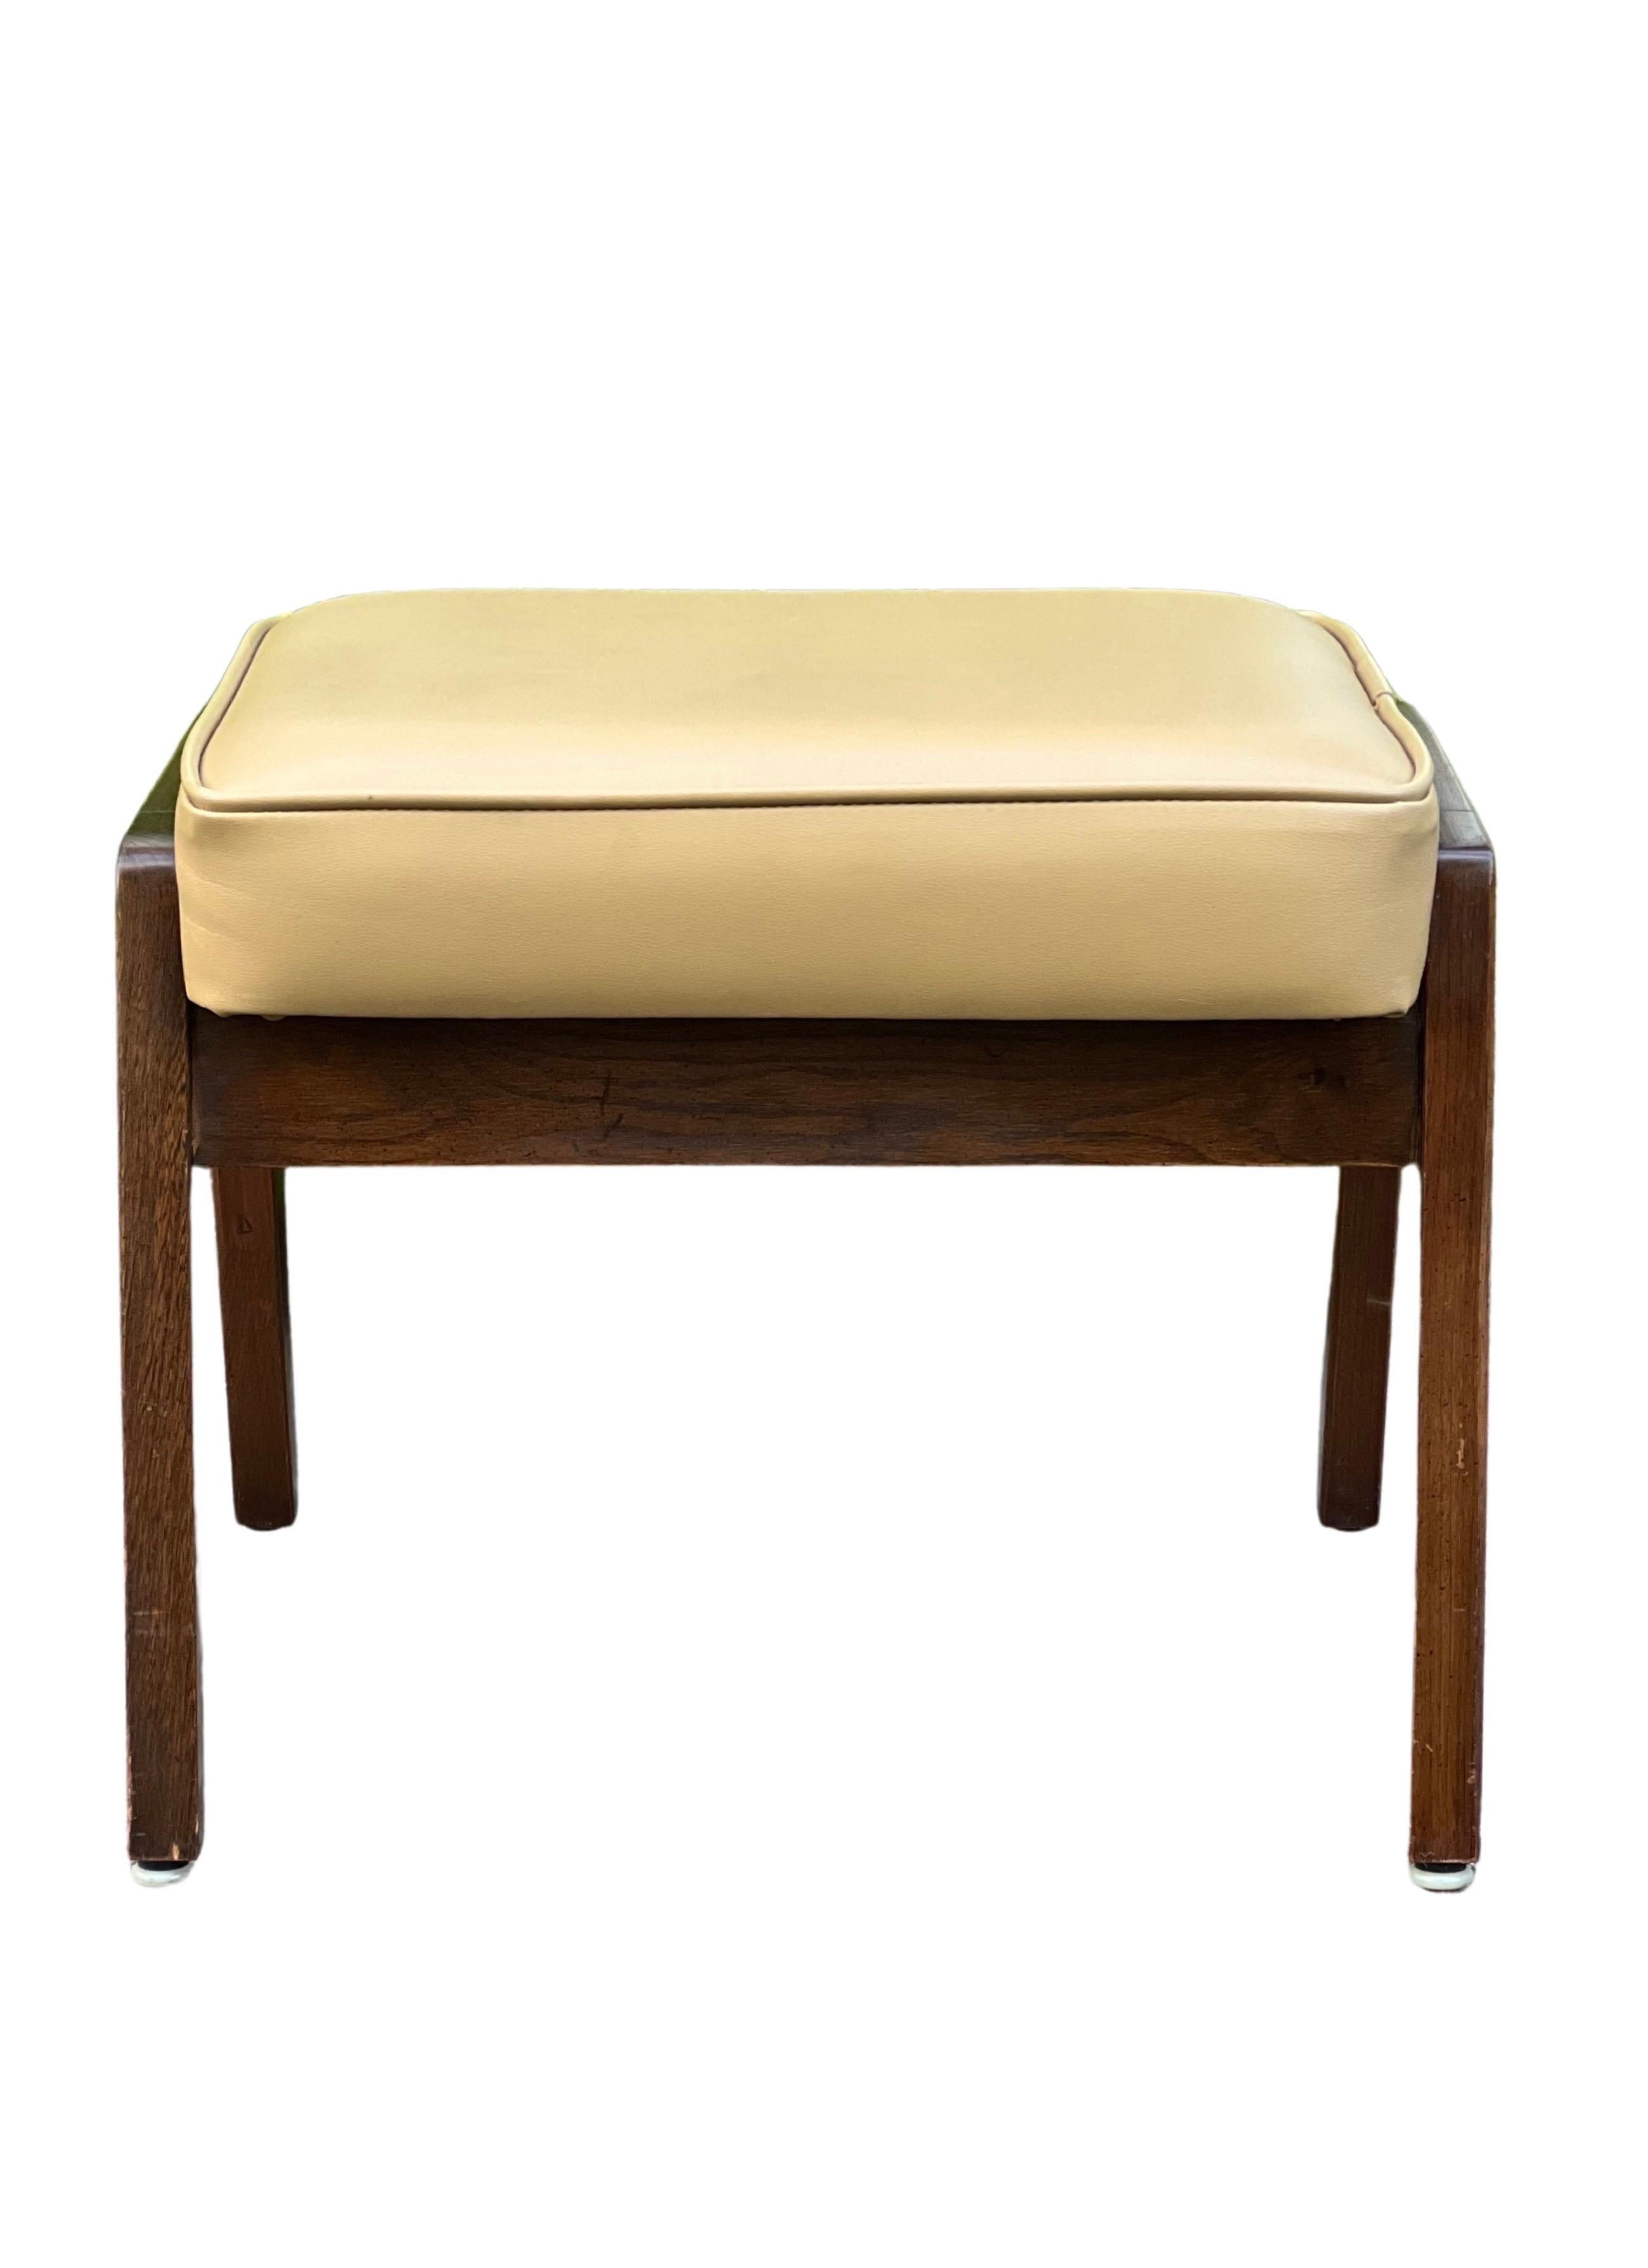 Vintage Mid Century Modern Walnut Upholstered Footstool In Good Condition For Sale In Doylestown, PA